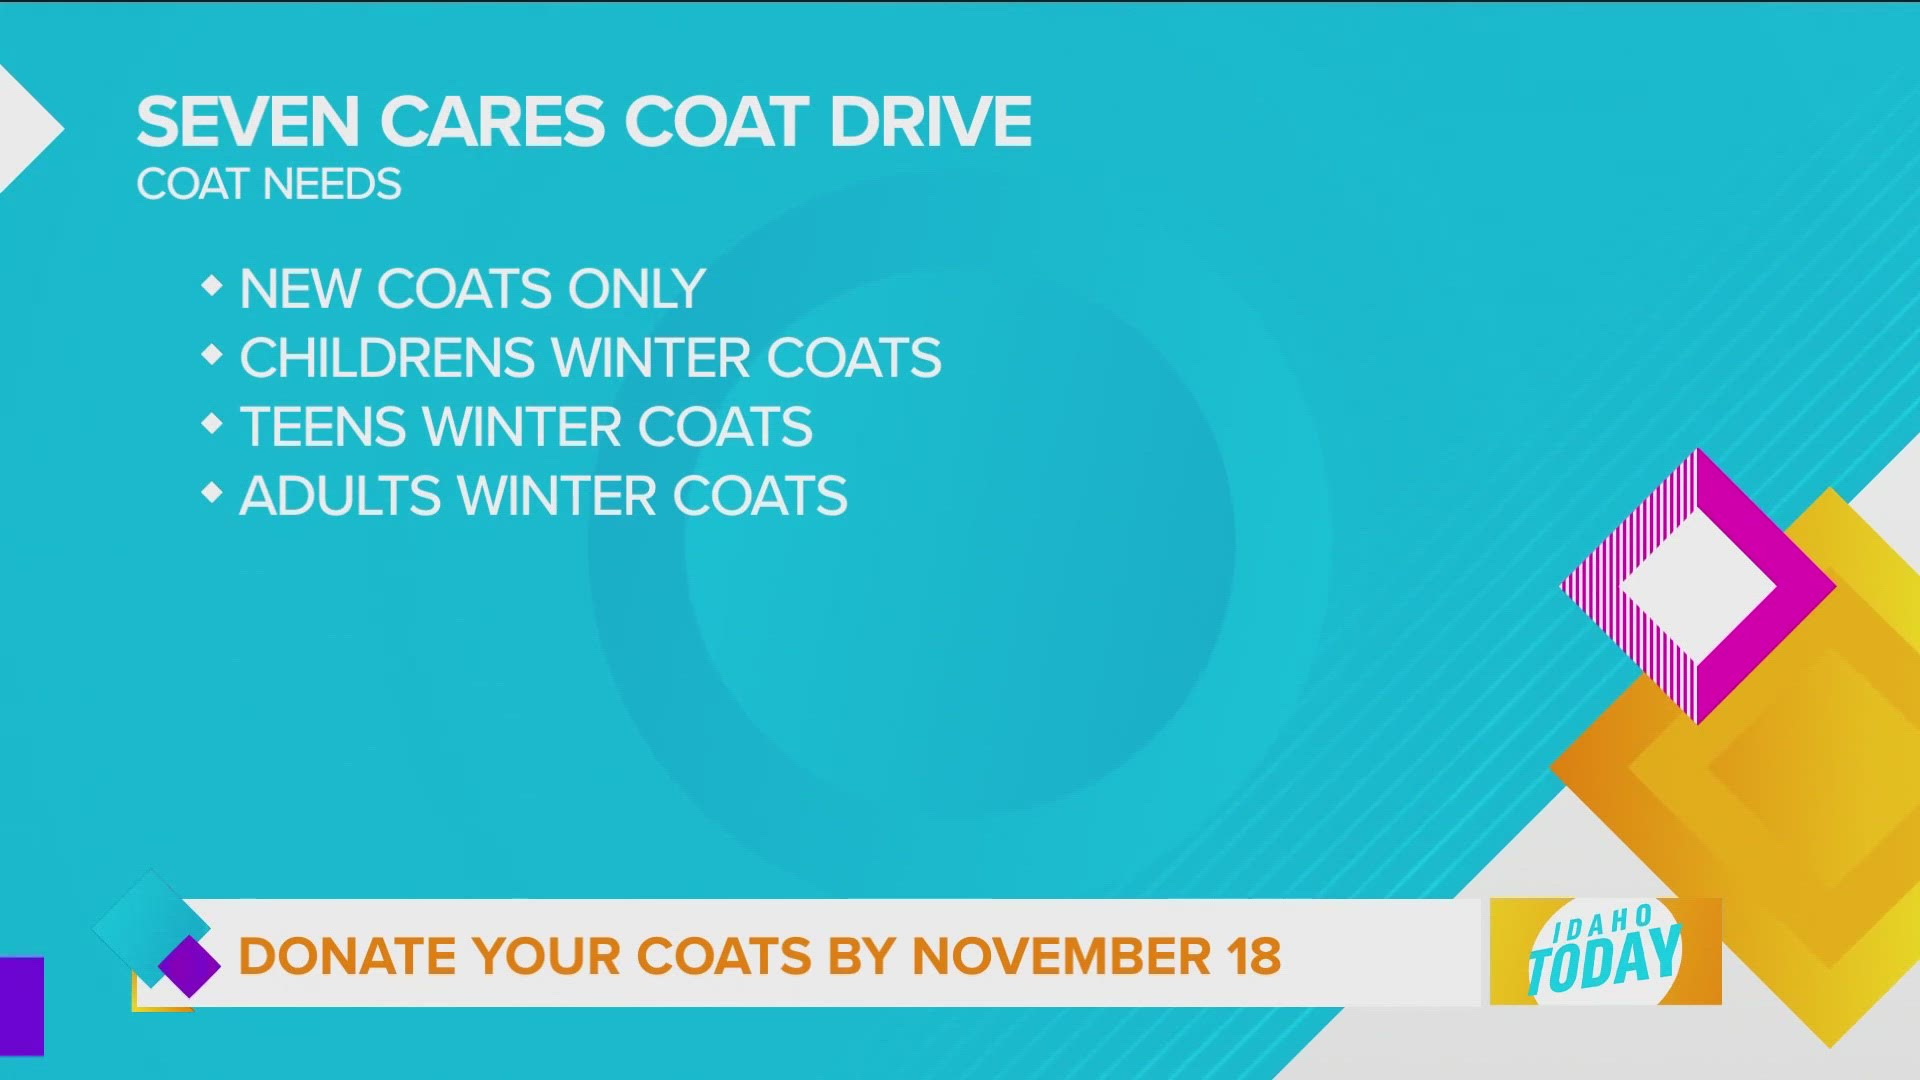 Fred Meyers is joining The Salvation Army to collect coats for those in need while Idaho’s temperatures drop.